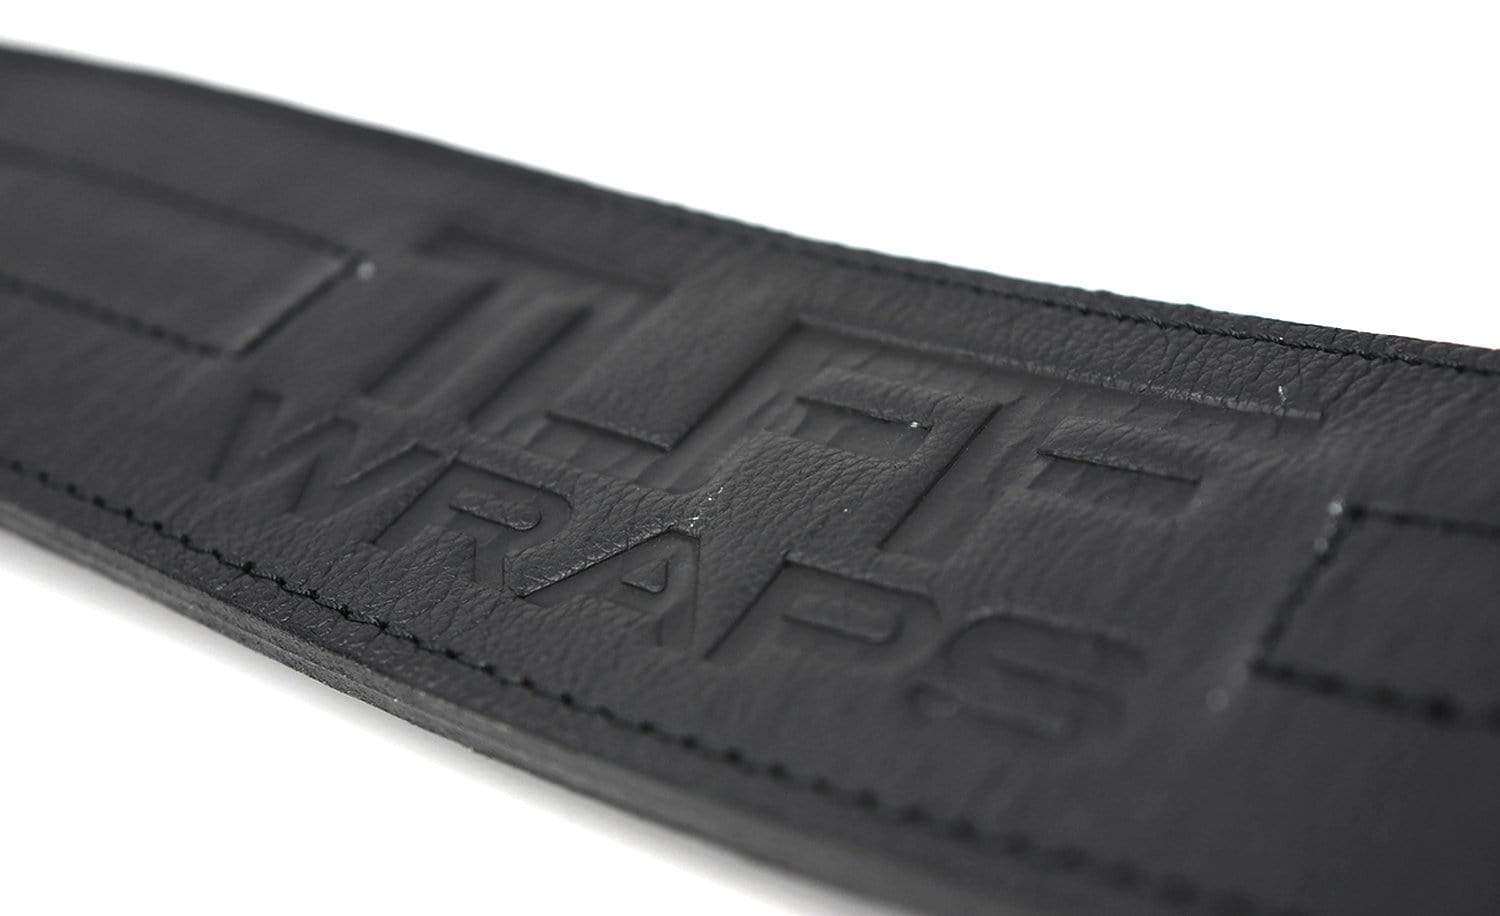 REP Premium Leather Lifting Belt | Weightlifting